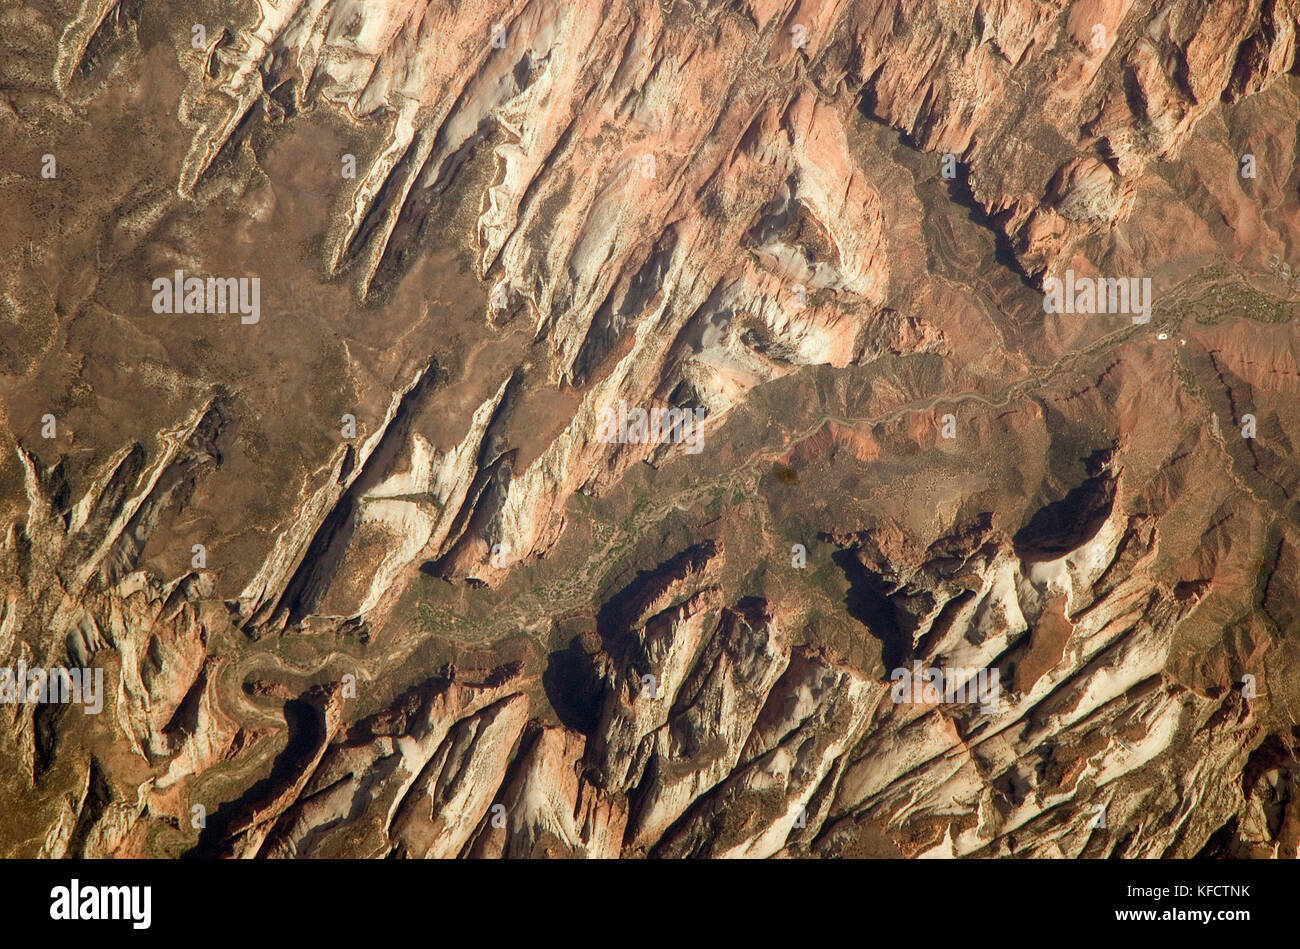 Zion National Park as viewed from the International Space Station,  is located in southwestern Utah, along the western margin of the Colorado Plateau. Stock Photo